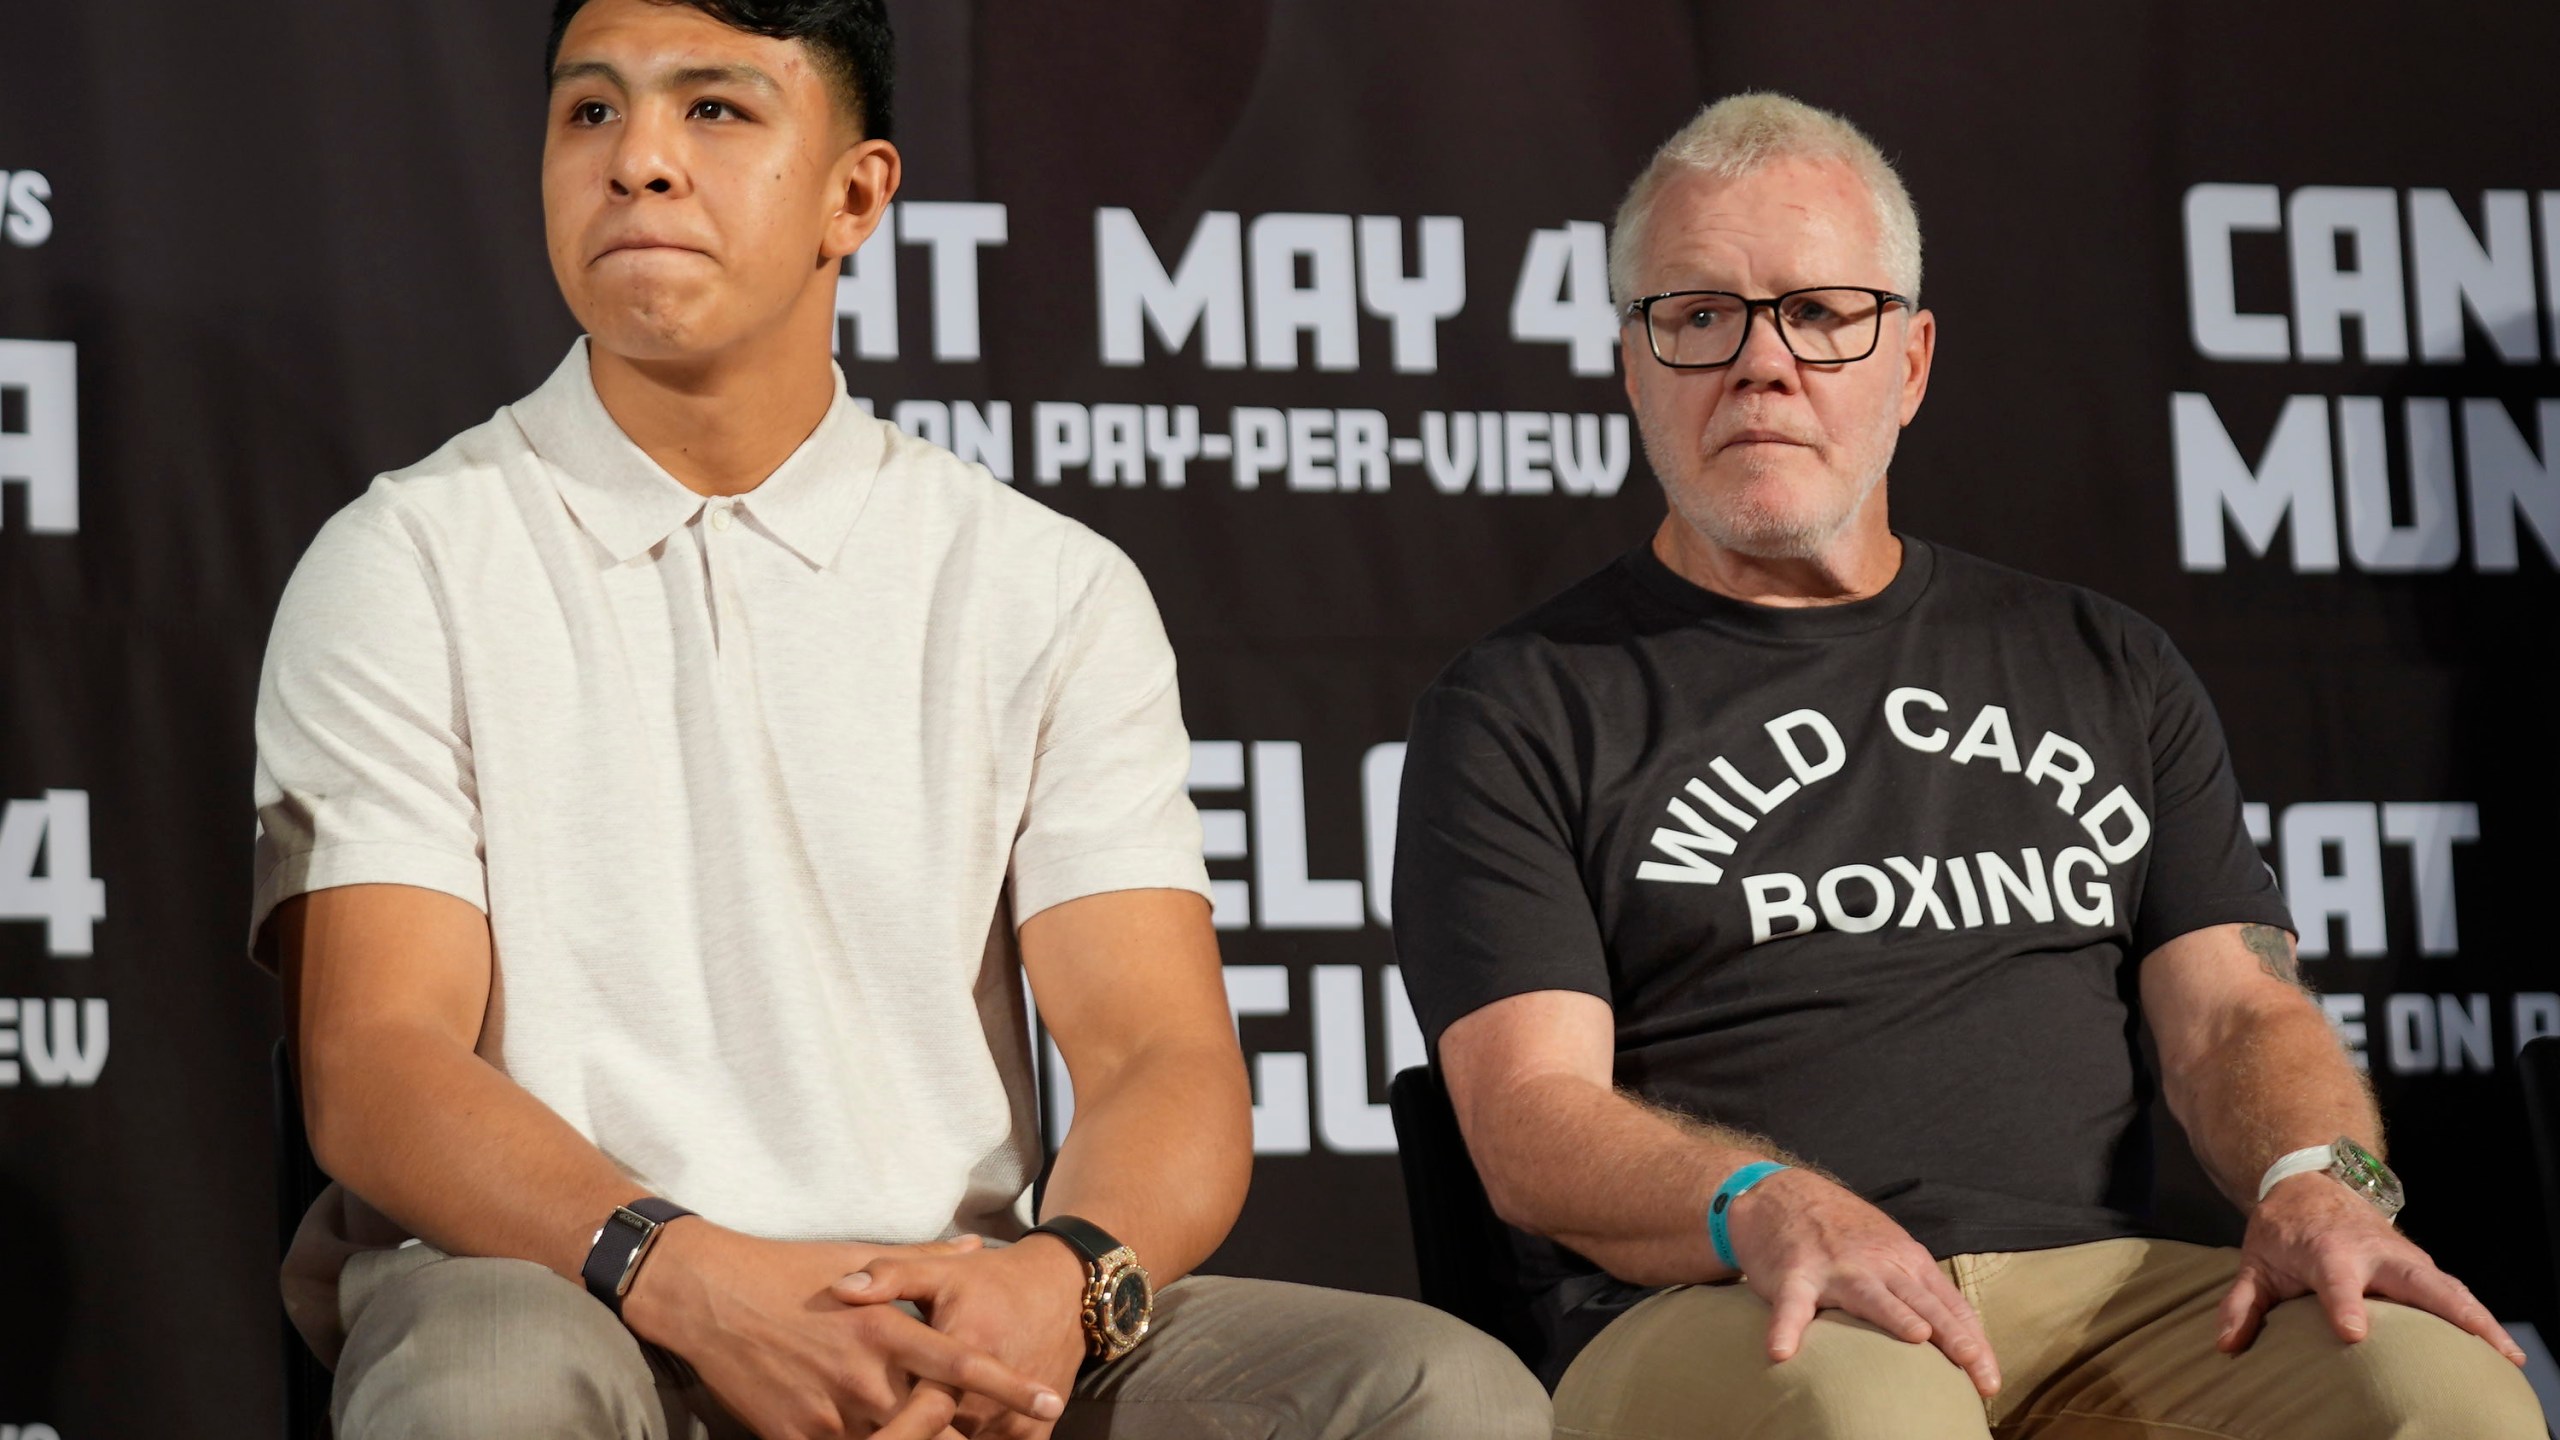 Boxer Jaime Munguía, left, with his trainer Freddie Roach take questions from the media about their upcoming fight with boxer Canelo Alvarez, during a news conference in Beverly Hills, Calif., Tuesday, March 19, 2024. Alvarez will defend his titles against All-Action Star Jaime Munguía on Saturday, May 4, at T-Mobile Area in Las Vegas. (AP Photo/Damian Dovarganes)